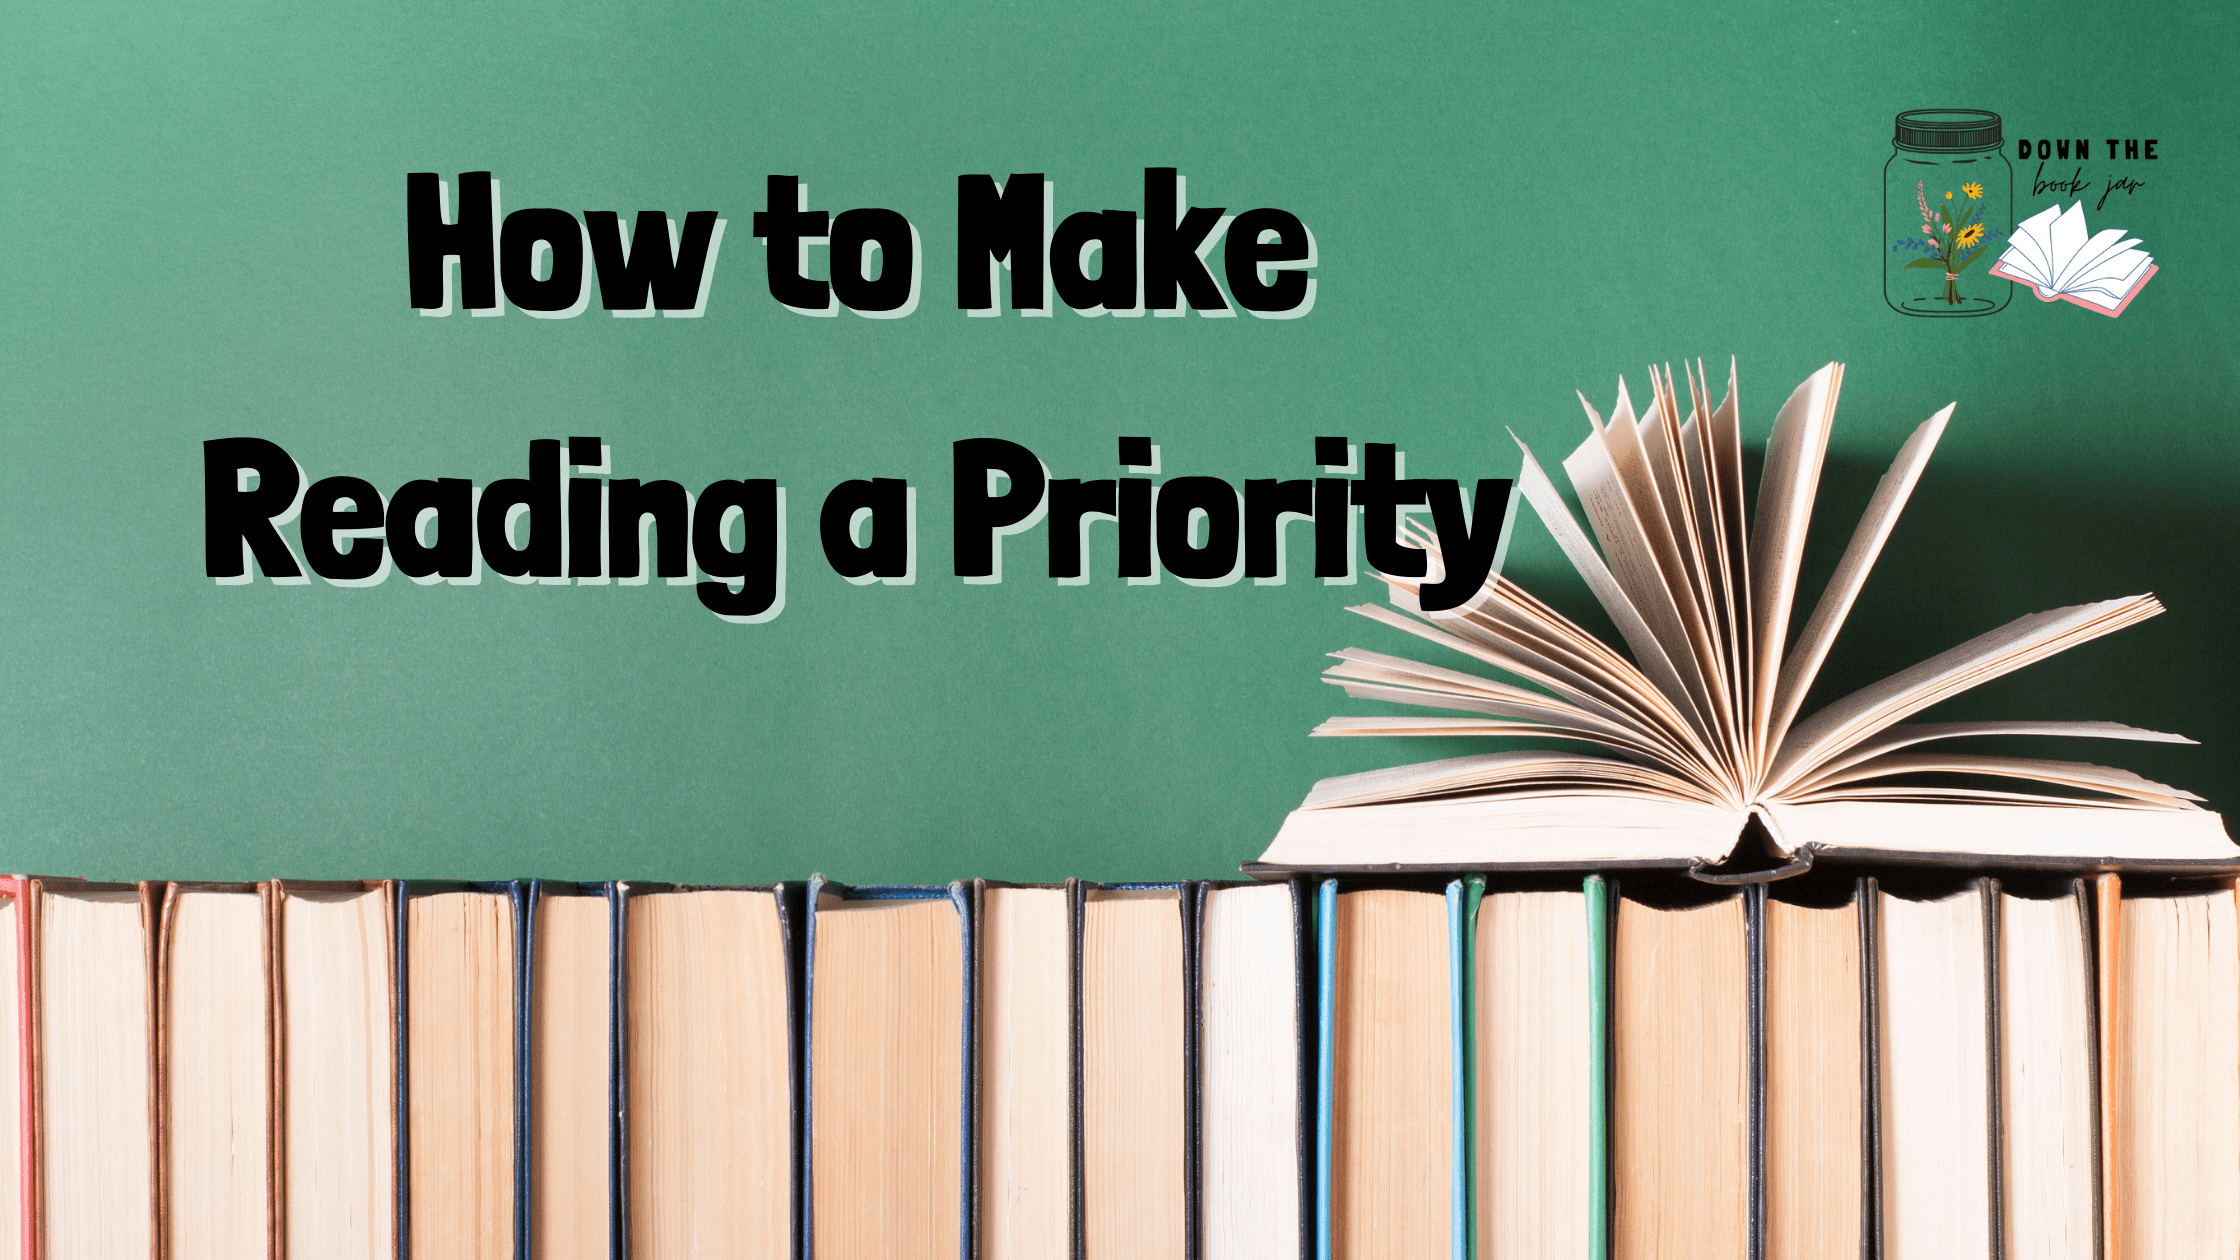 How to Make Reading a Priority